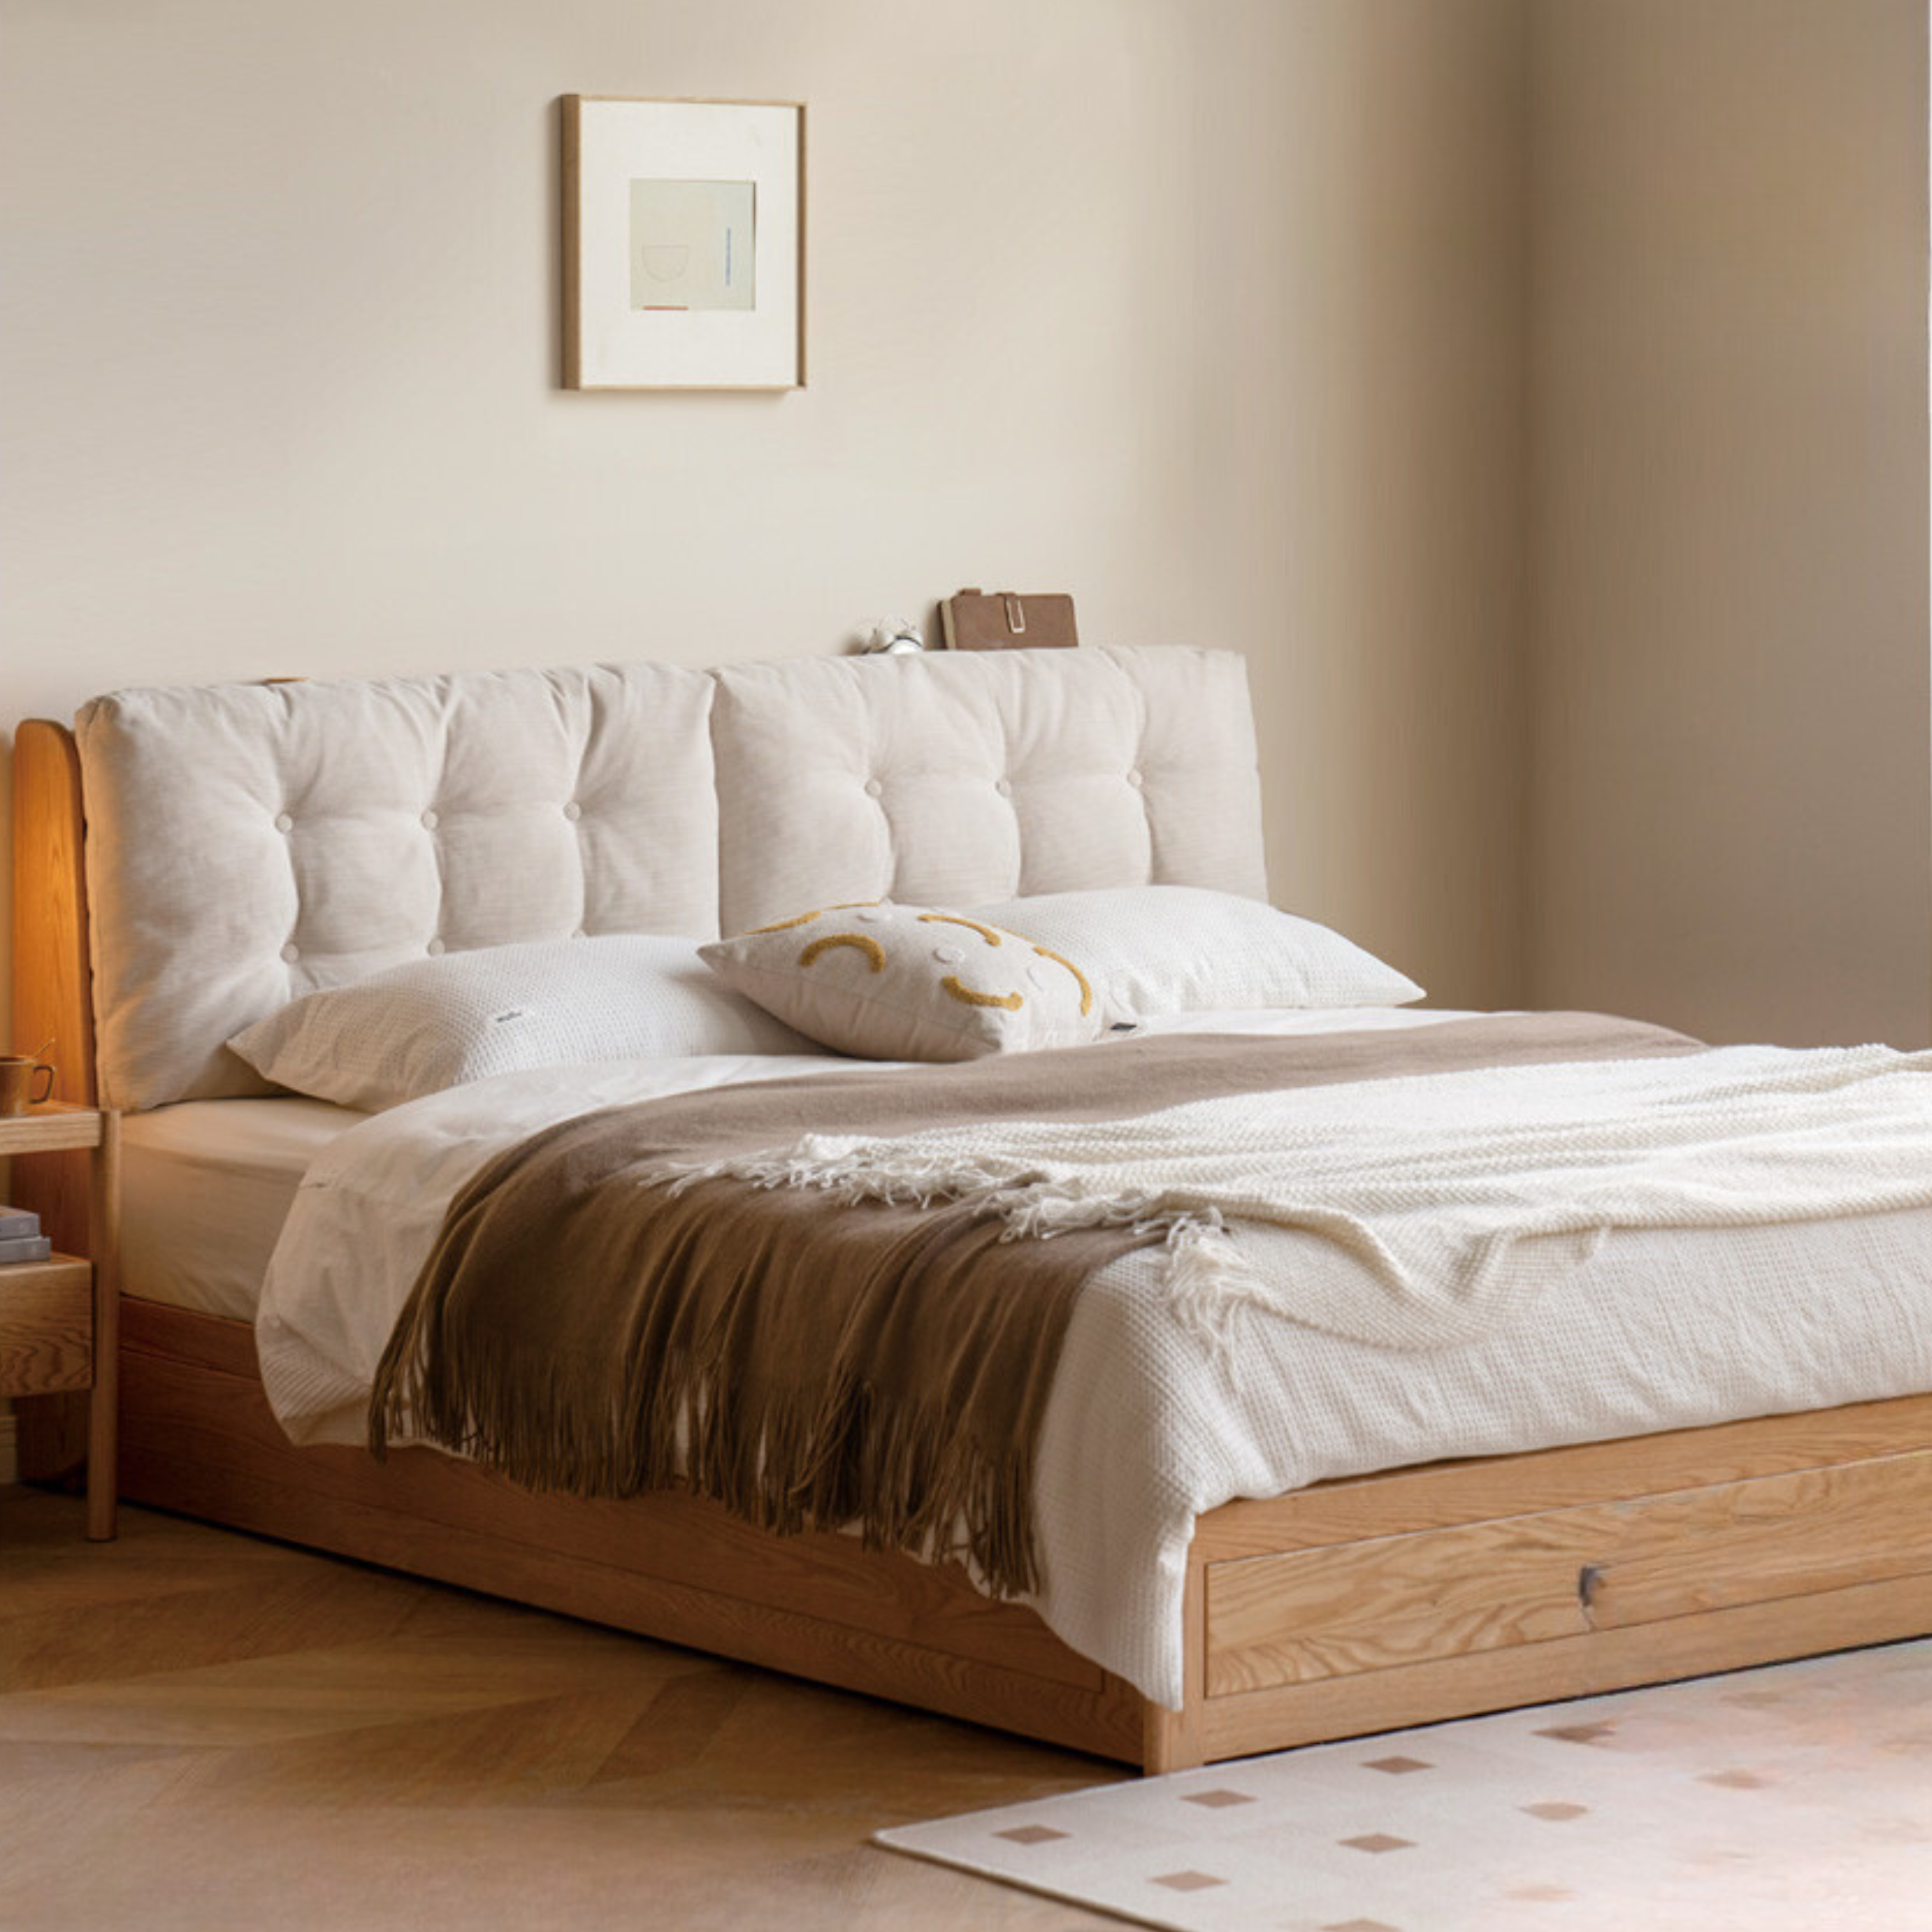 Oak solid wood fabric box bed cream style"